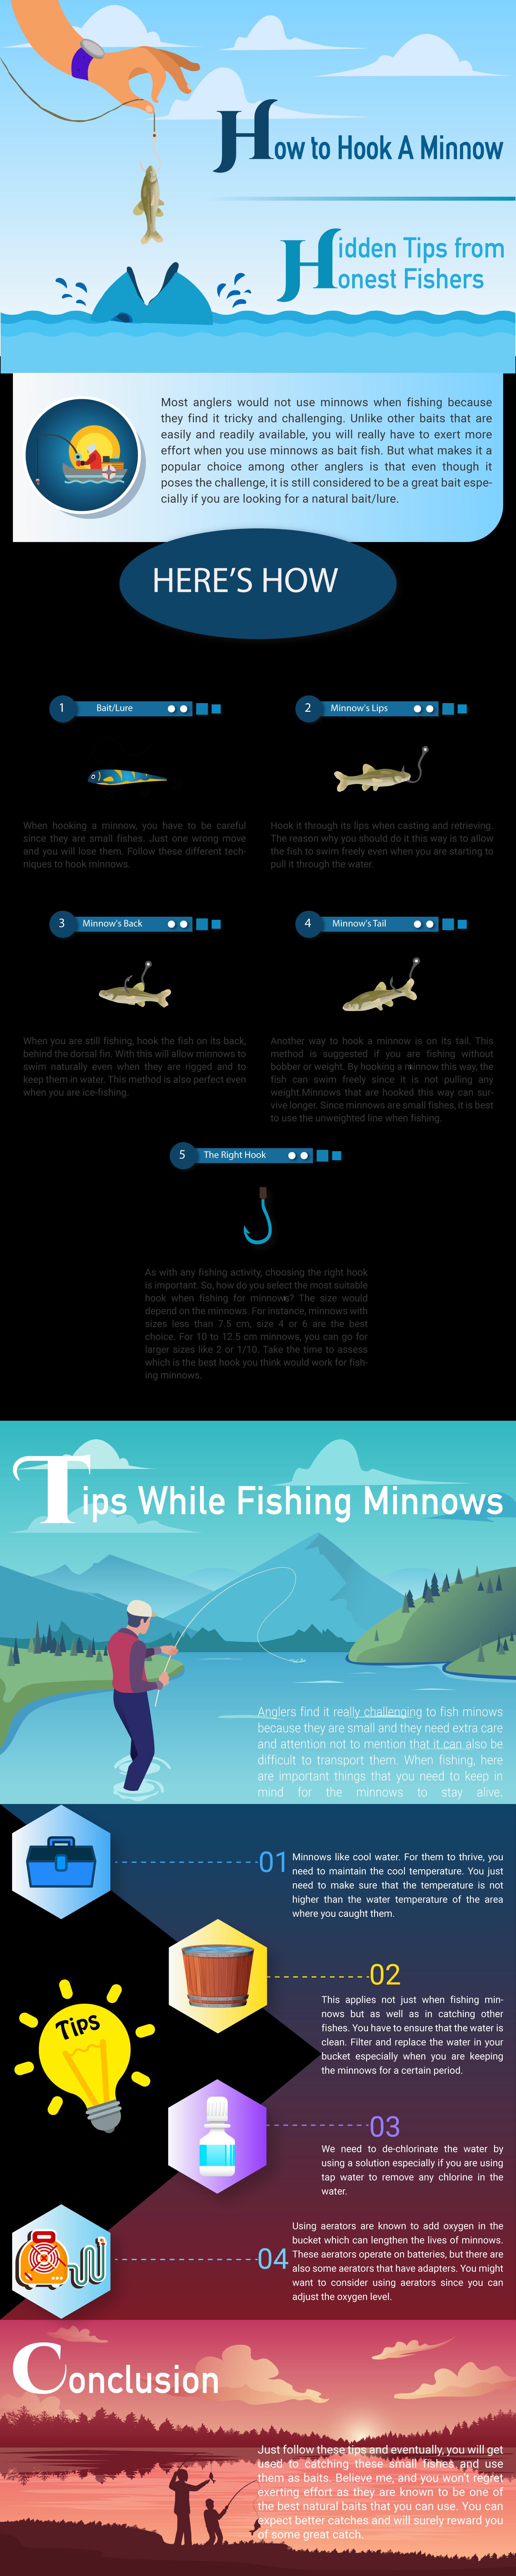 How To Hook A Minnow